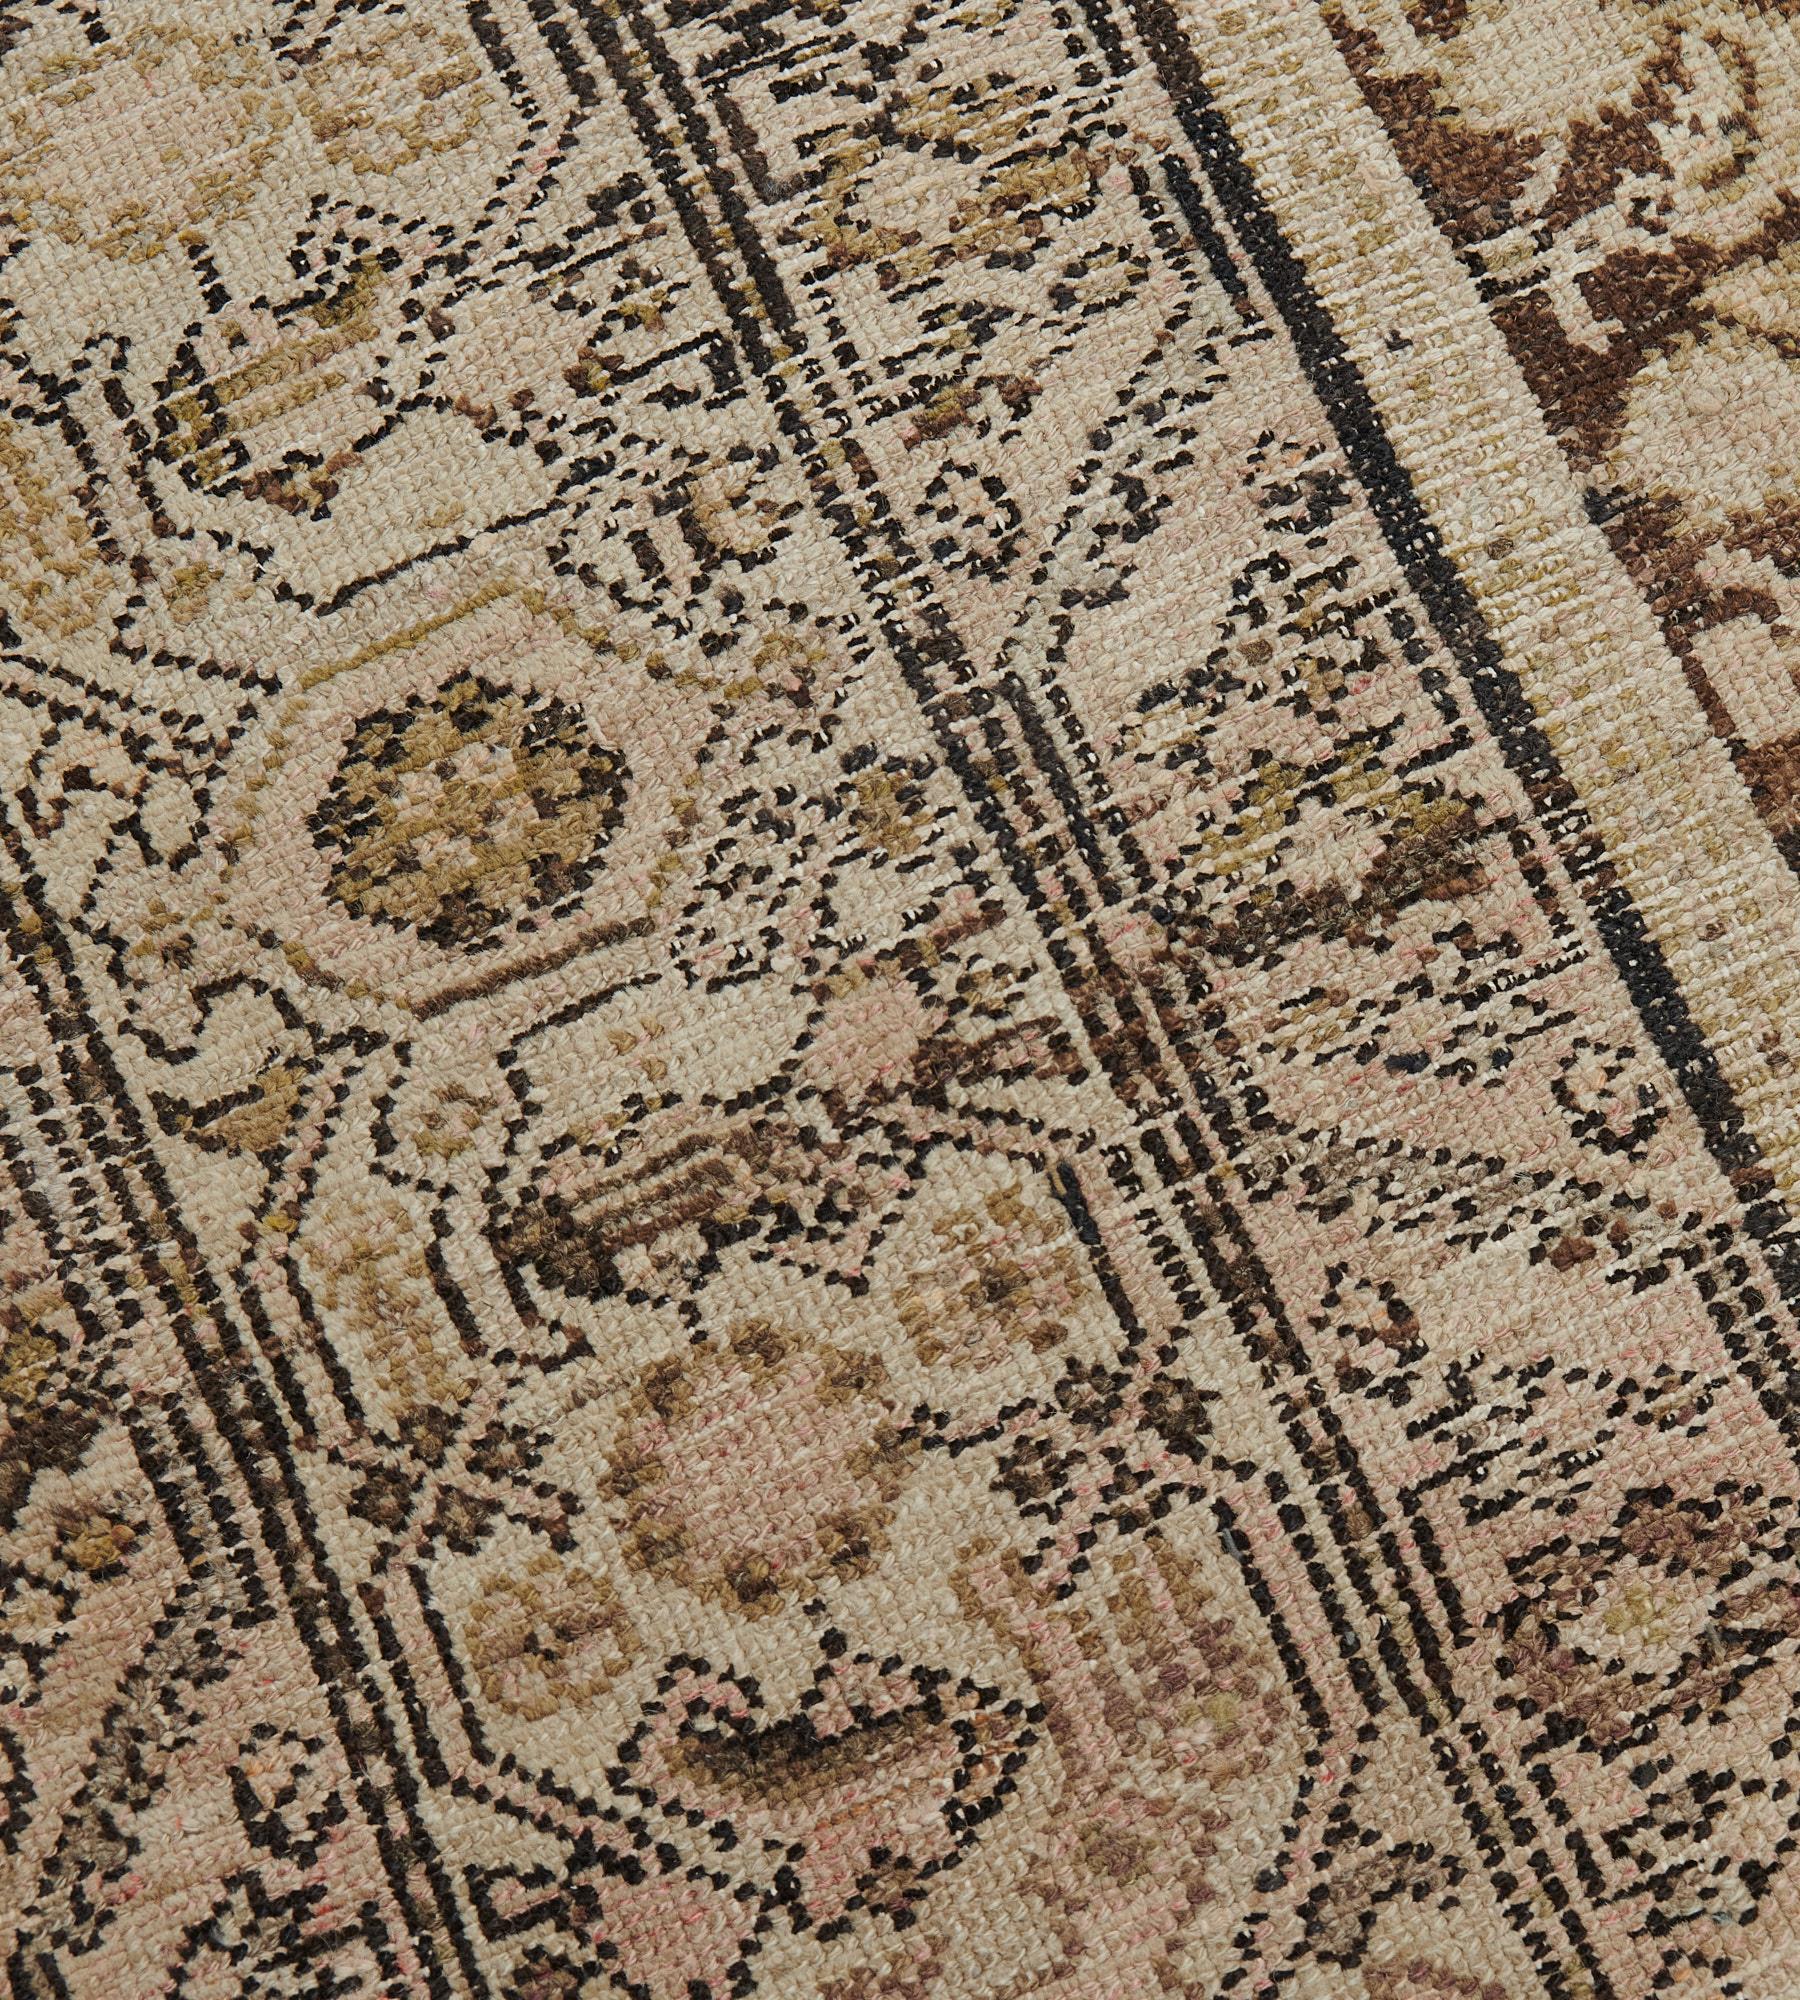 This antique, circa 1900, Malayer rug has a chocolate-brown field with an overall ivory, dusty-pink and pistachio-green herati-pattern, in an ivory border with pistachio-green, dusty-pink and chocolate-brown turtle-palmette and floral vine between